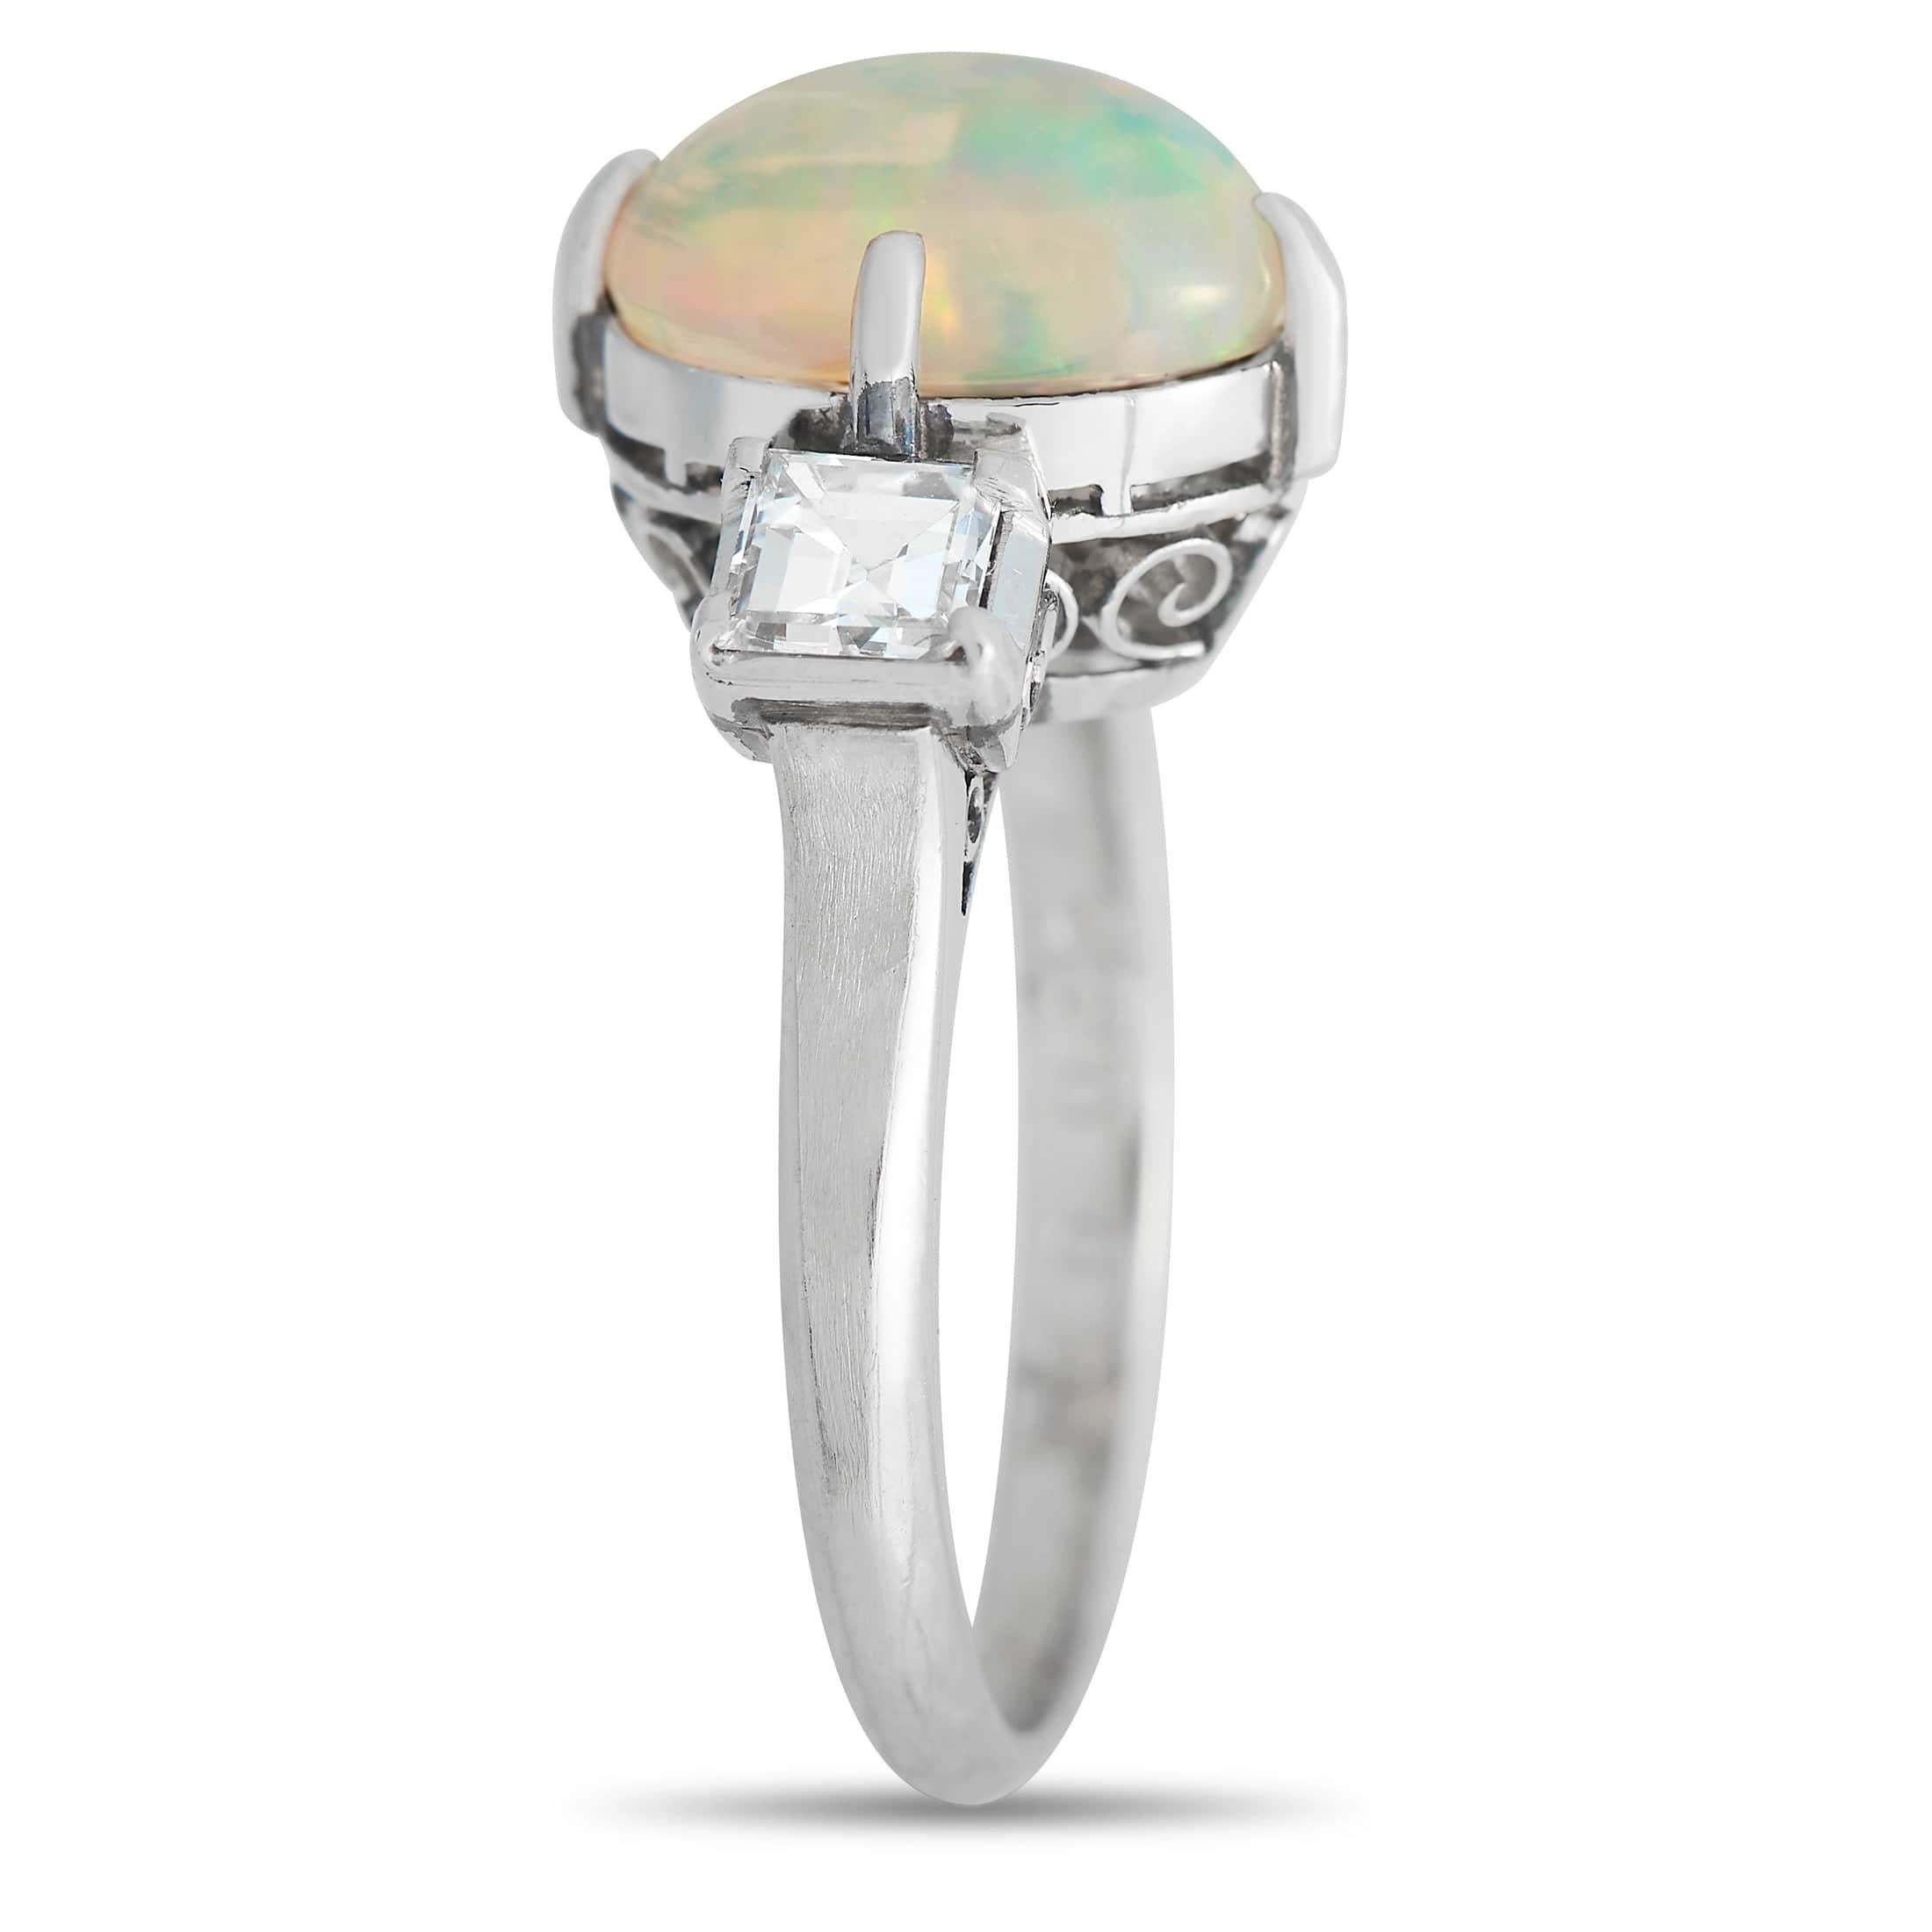 A colorful 1.90 carat Opal gemstone makes a statement at the center of this fabulous ring. A pair of square-cut diamonds totaling 0.49 carats add extra sparkle to this exquisite piece, which features a Platinum setting with a 2mm wide band and a 9mm